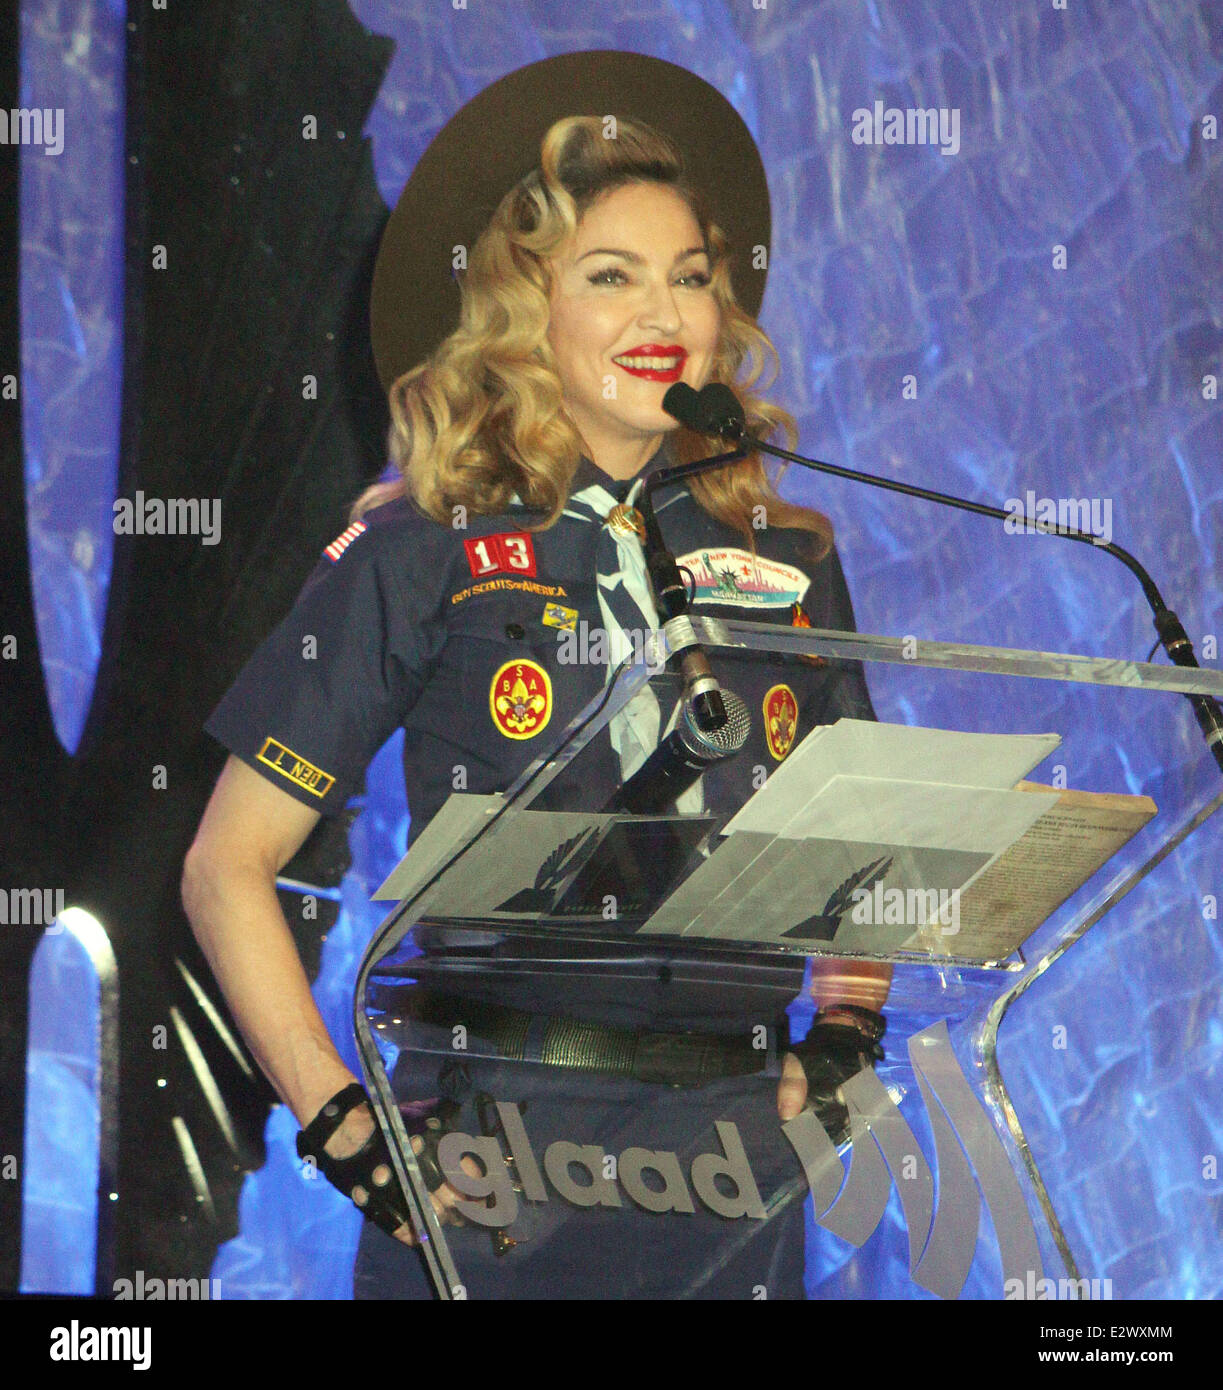 24th Annual GLAAD Media Awards - Madonna presents the Vito Russo Award to Anderson Cooper  Featuring: Madonna Where: New York, NY, United States When: 16 Mar 2013   **** Stock Photo